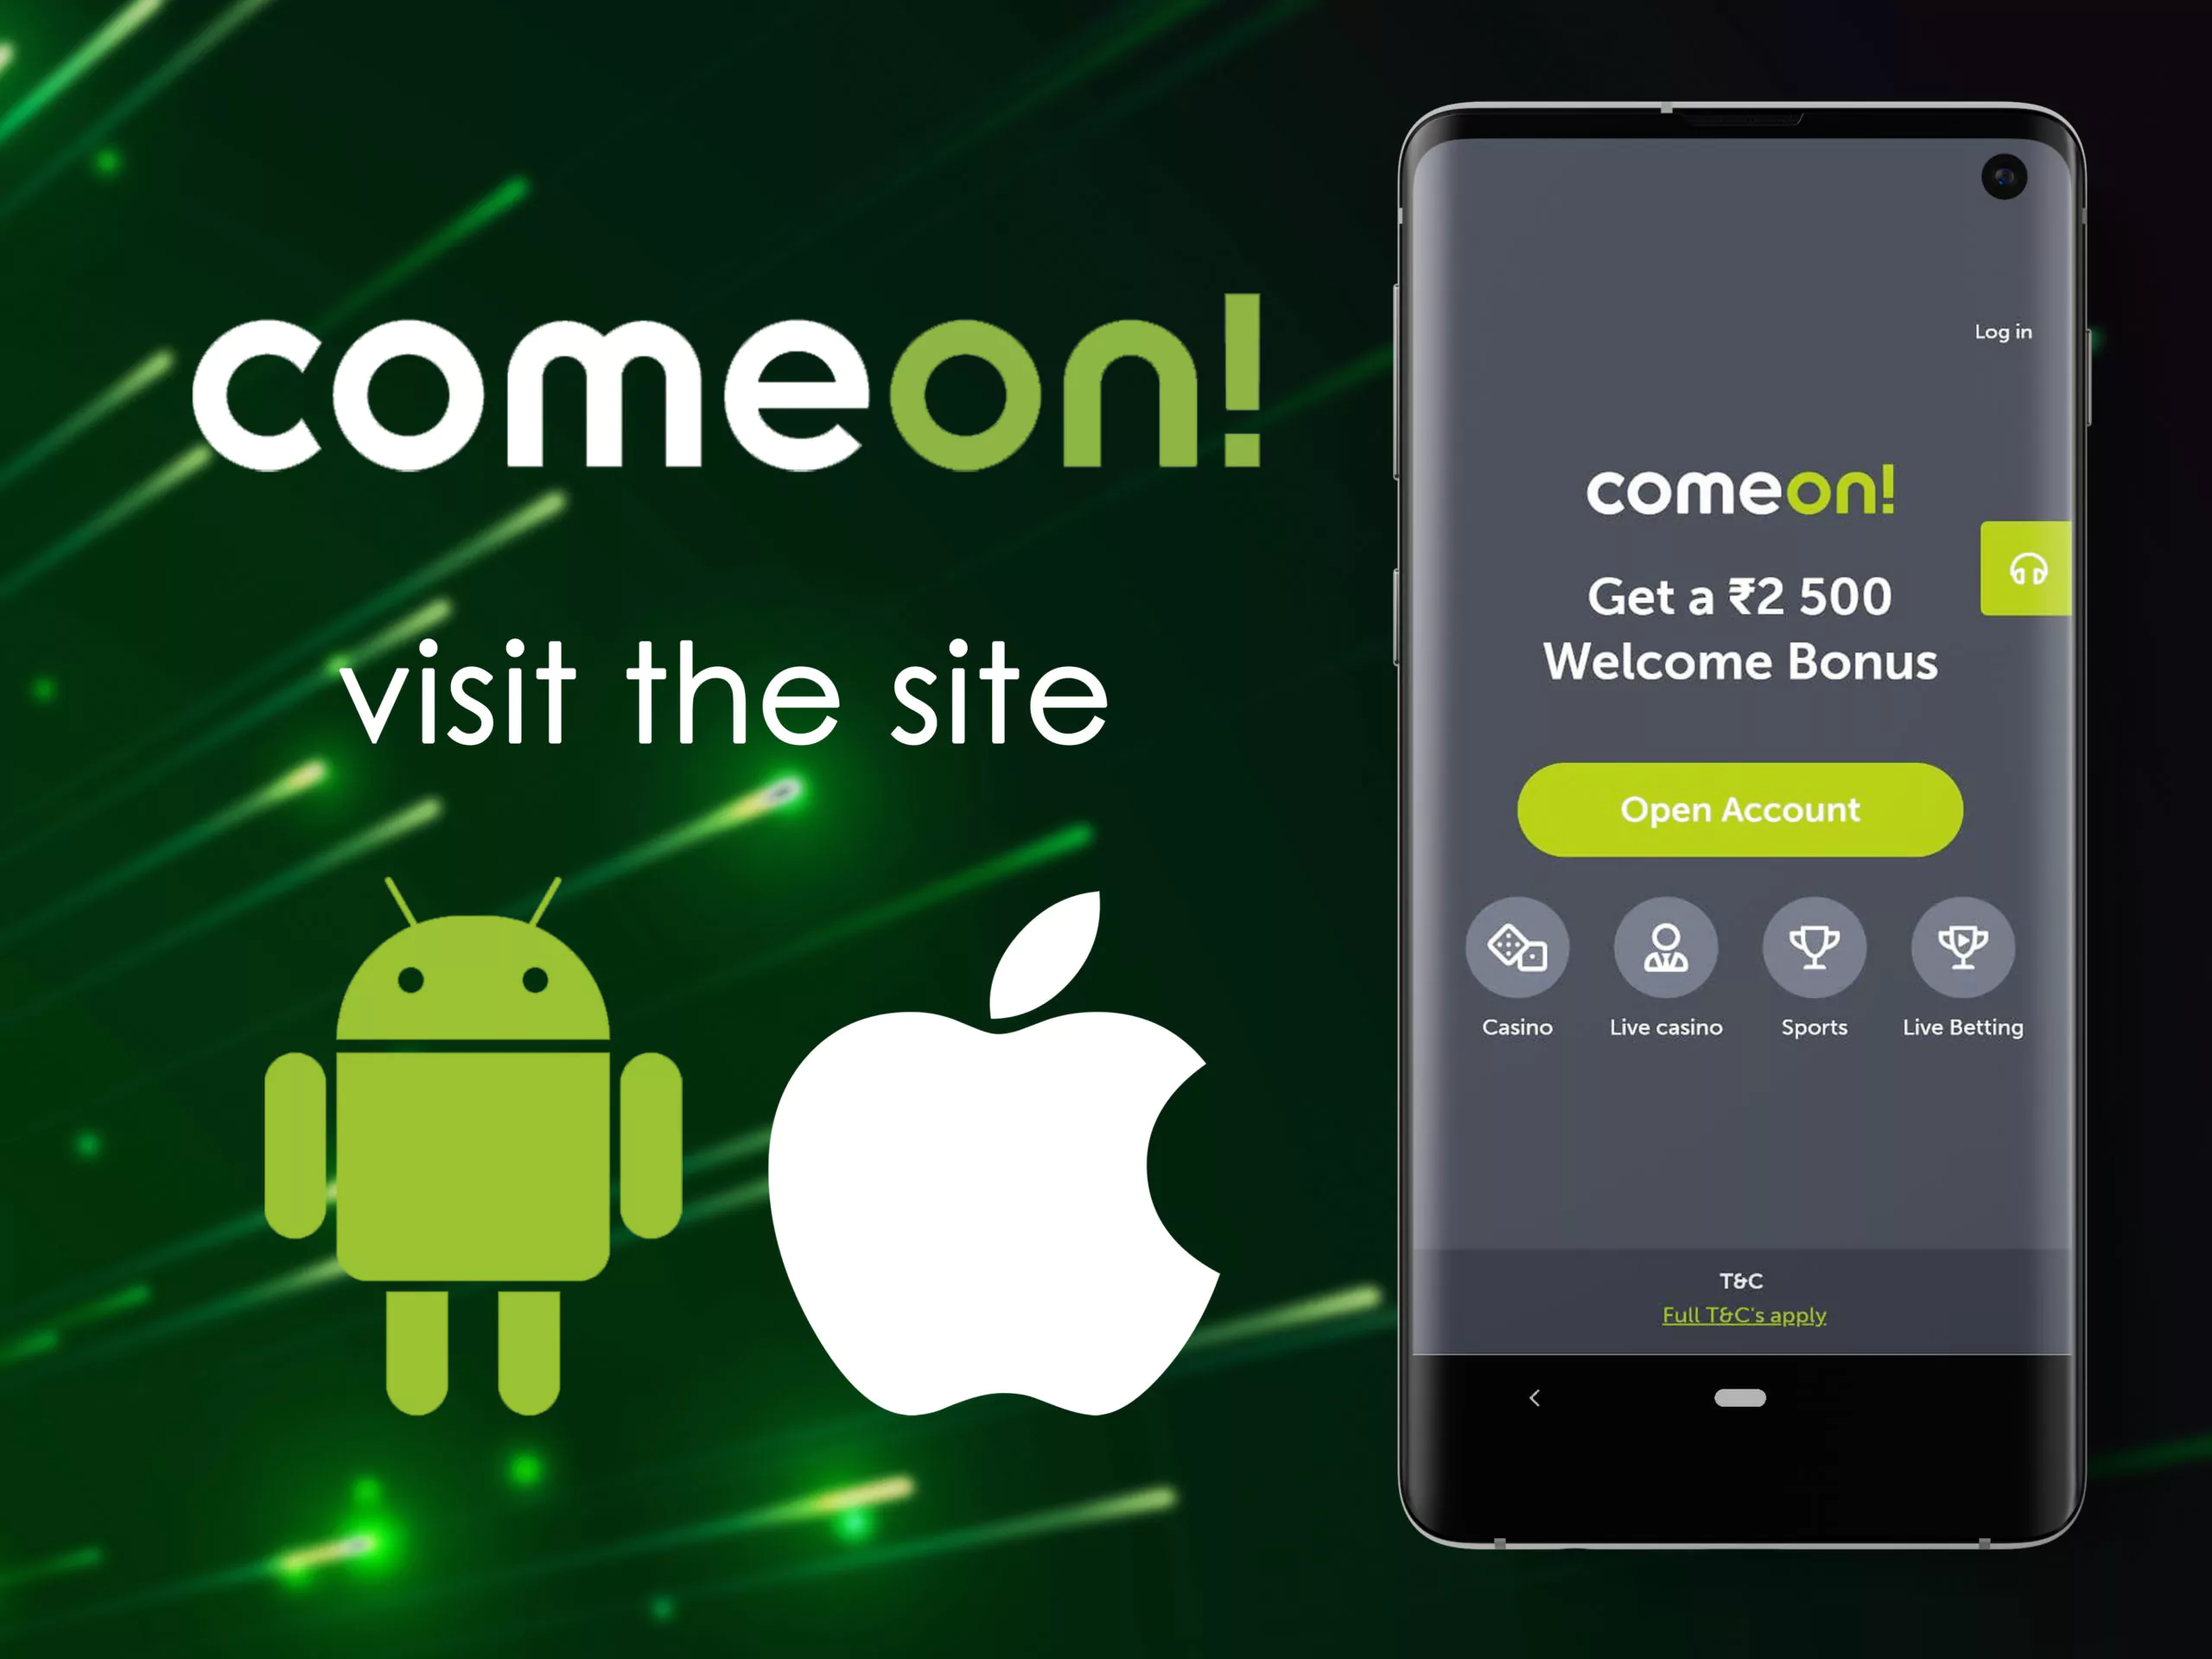 Open the site of Comeon in a mobile browser.